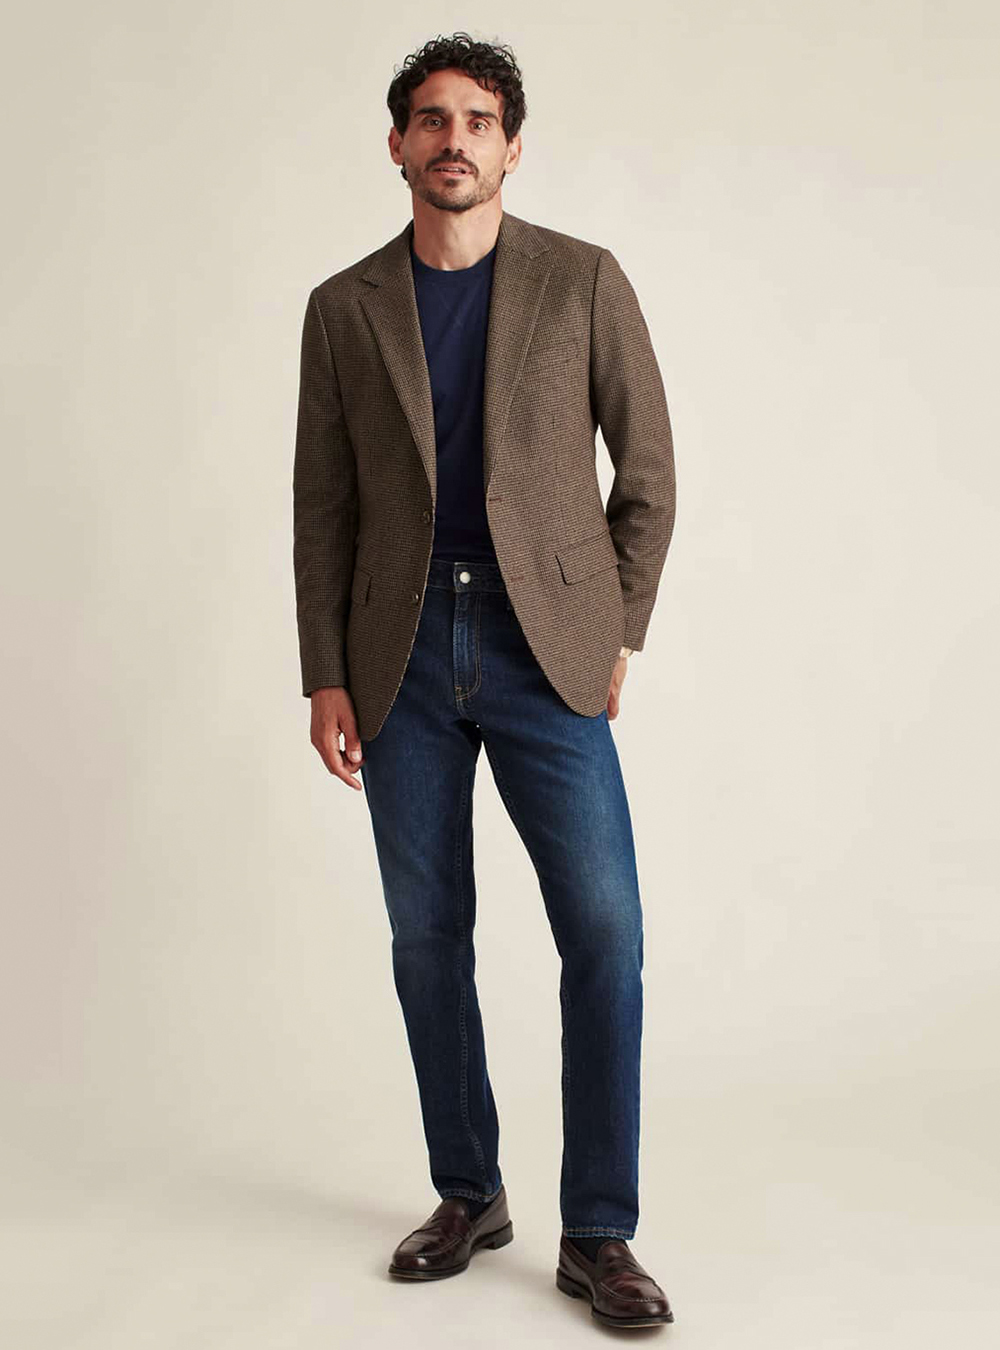 brown blazer, navy t-shirt, blue jeans, and dark brown loafers